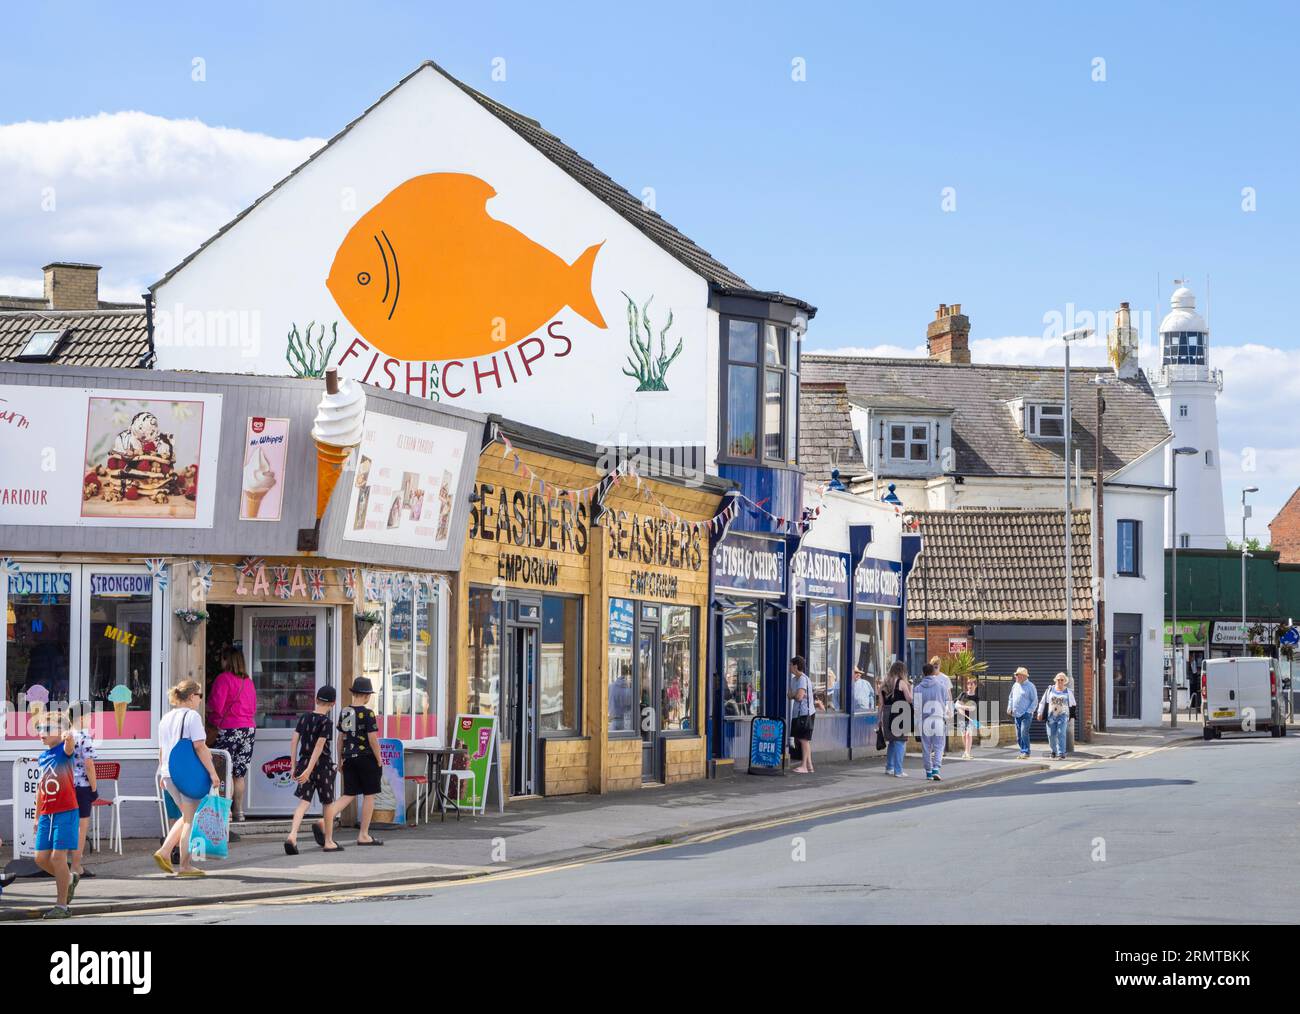 Withernsea Yorkshire Seasiders Fish and Chip shop and takeaway Seaside road Withernsea East Riding of Yorkshire England UK GB Europe Stock Photo